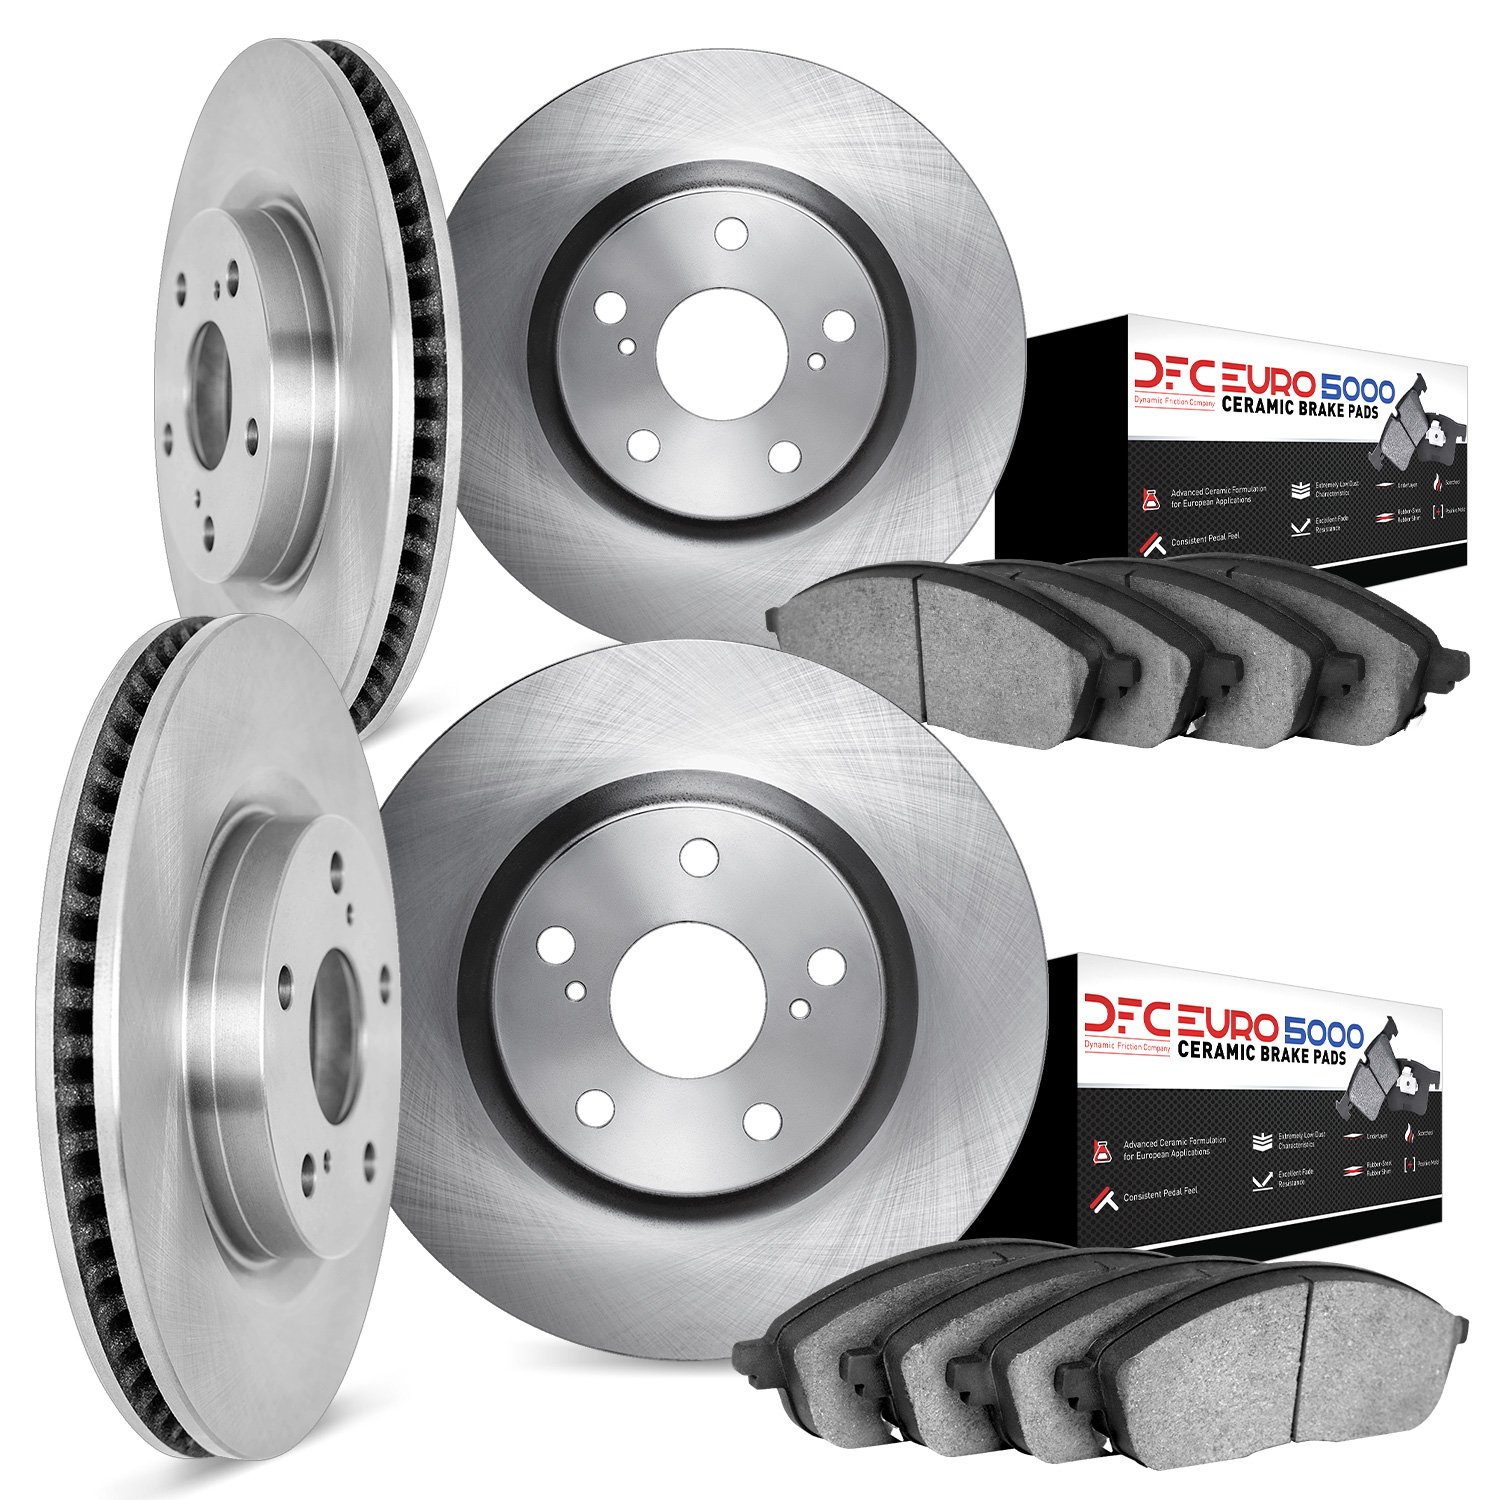 6604-11958 Brake Rotors w/5000 Euro Ceramic Brake Pads, 2005-2014 Ford/Lincoln/Mercury/Mazda, Position: Front and Rear